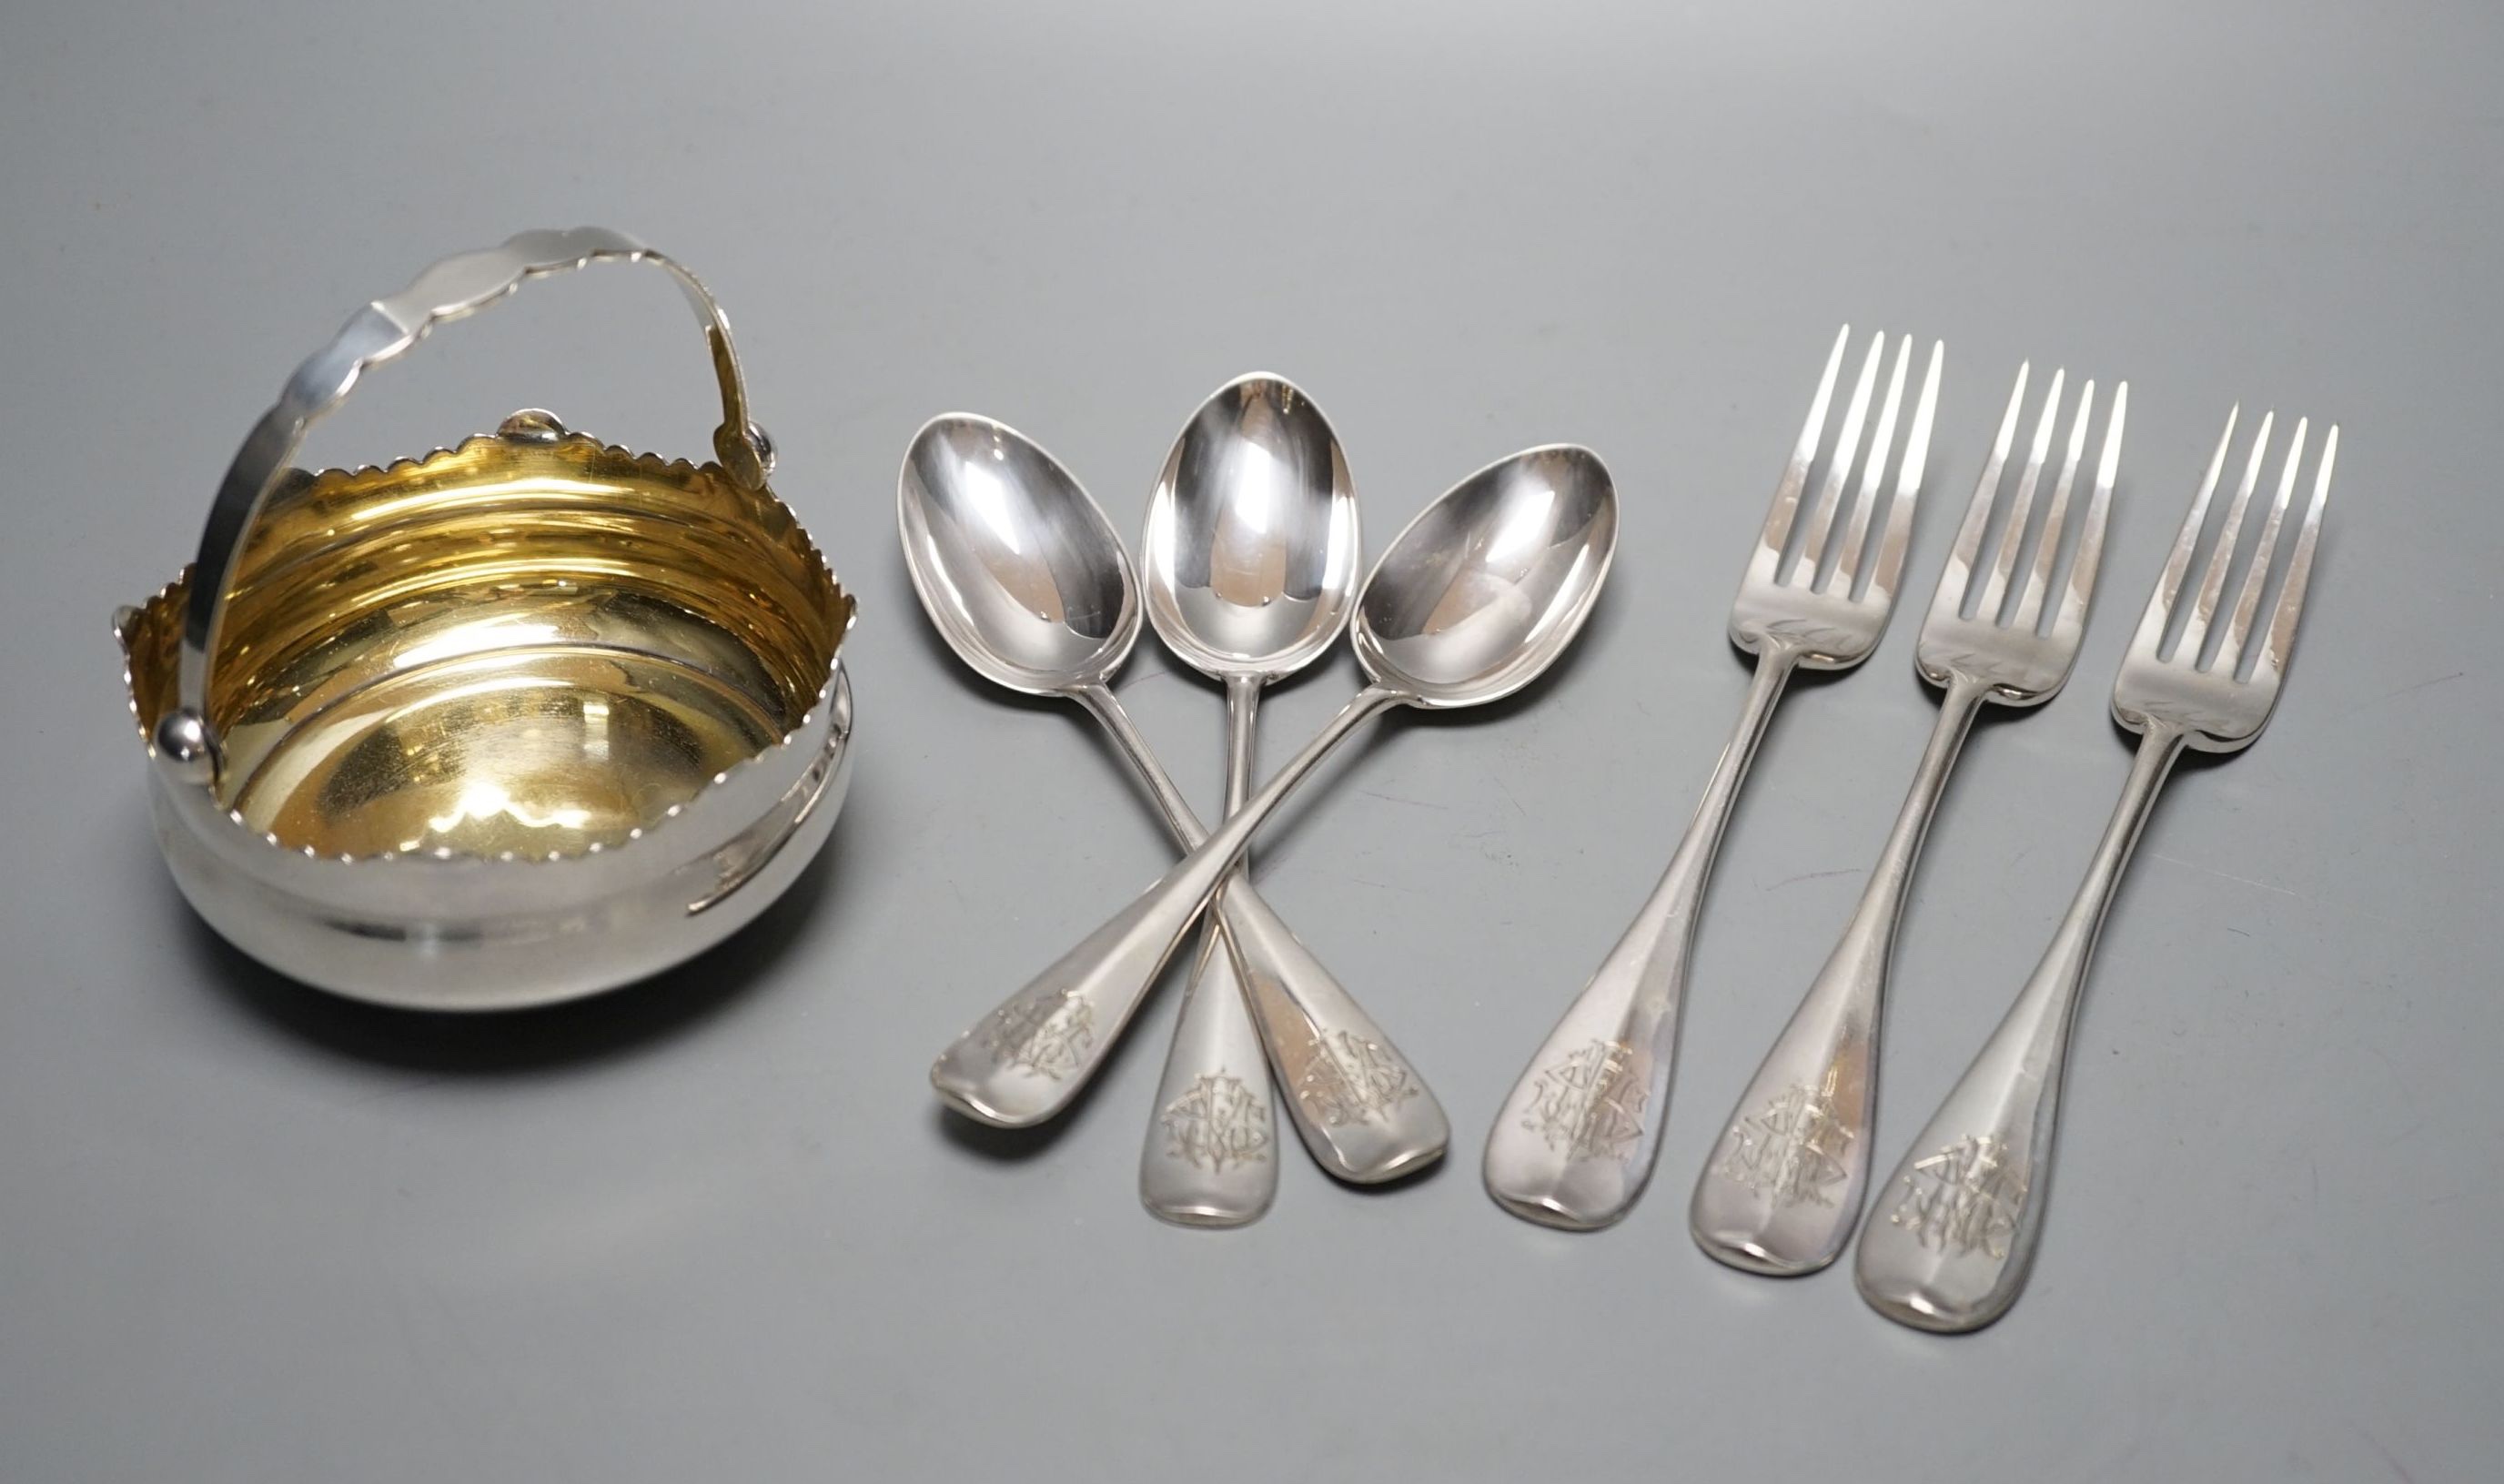 An early 20th century Russian .875 standard white metal bonbon basket, Odessa, 1908-1926, diameter 10.2cm, together with three late 19th century Russian 84 zolotnik table forks and three dessert spoons, master Klebnikov,